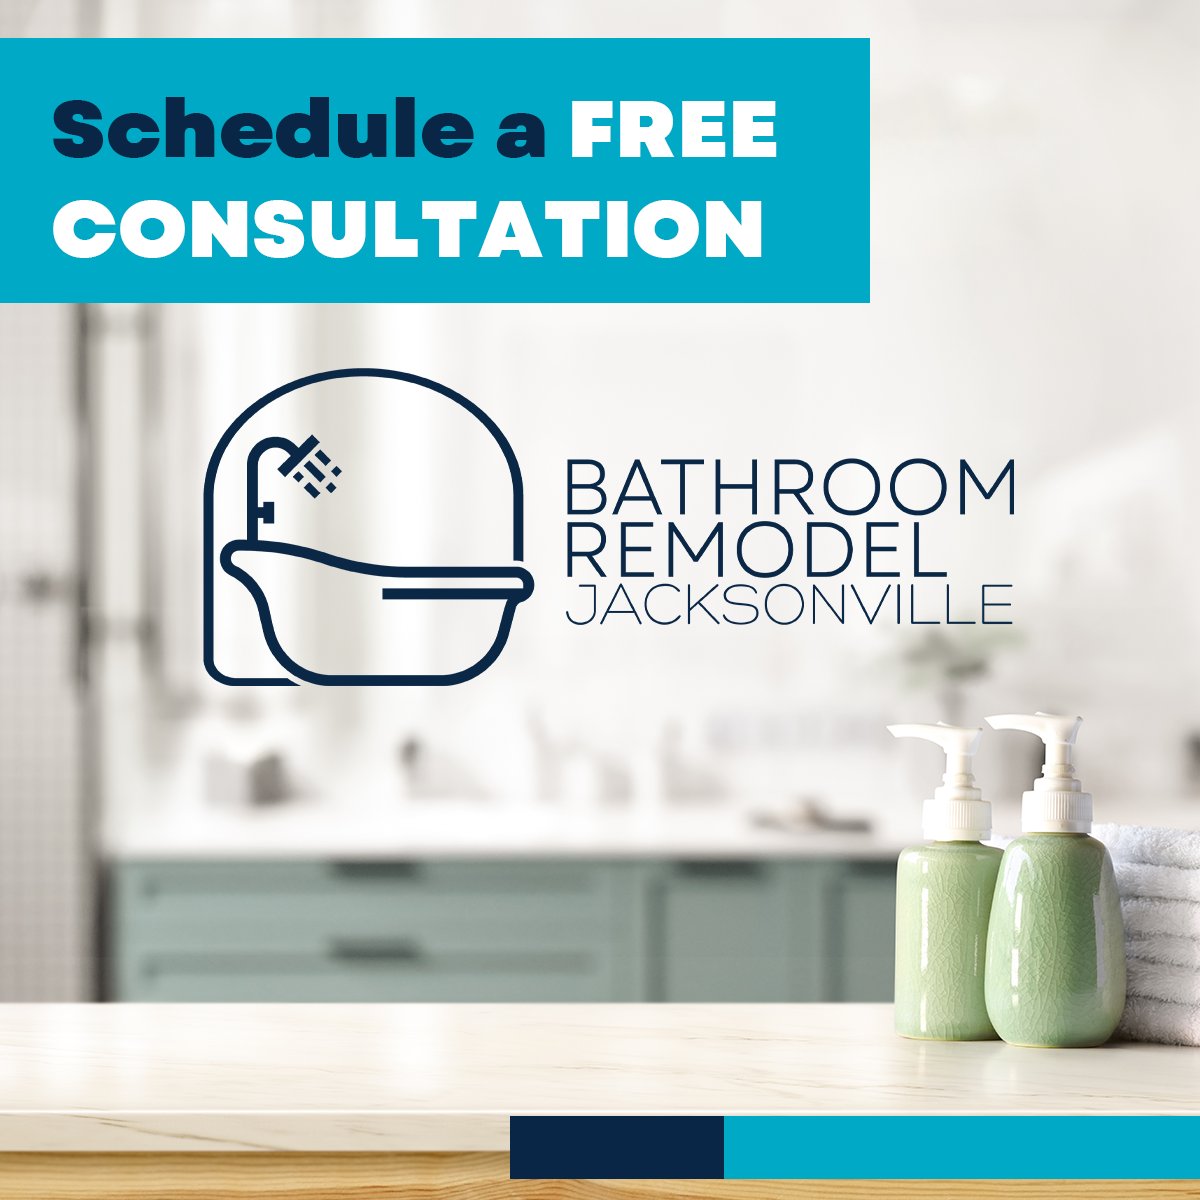 Elevate your daily routine with a bathroom tailored to your style and needs.

Contact us now at 904-875-2005!

bathroomremodeljacksonville.com/contact-us/

#BathroomRemodelJacksonville #FreeConsultation #BathroomInspiration #HomeRenovation #BathroomStyle